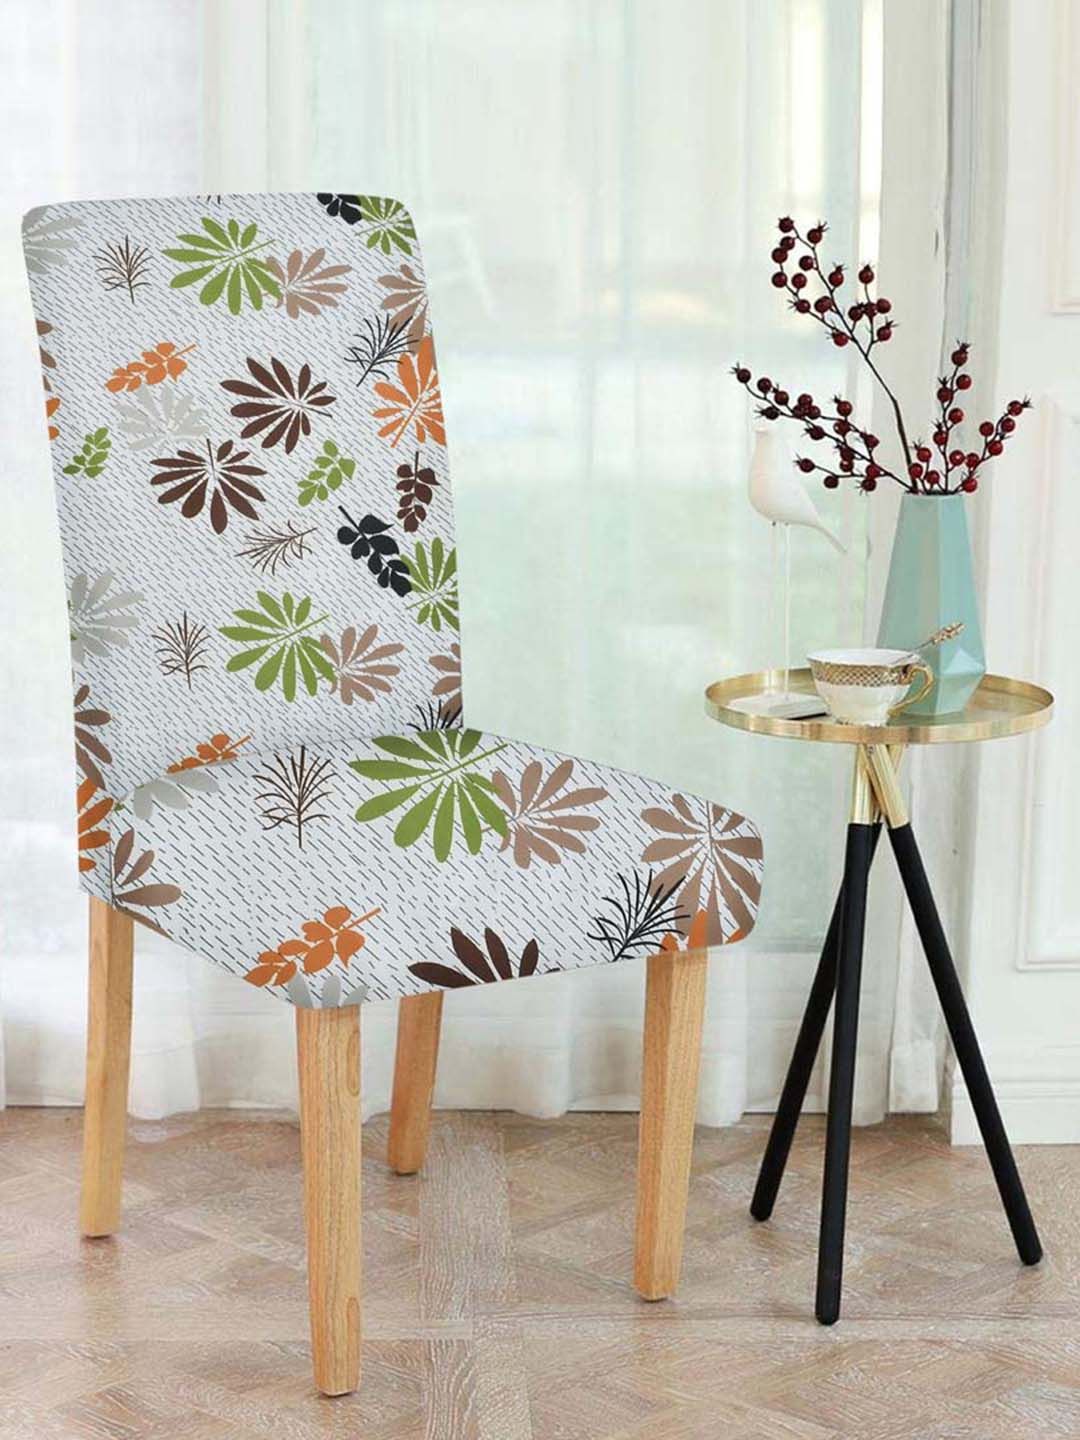 Slushy Mushy Set Of 6 Floral Printed Chair Covers Price in India